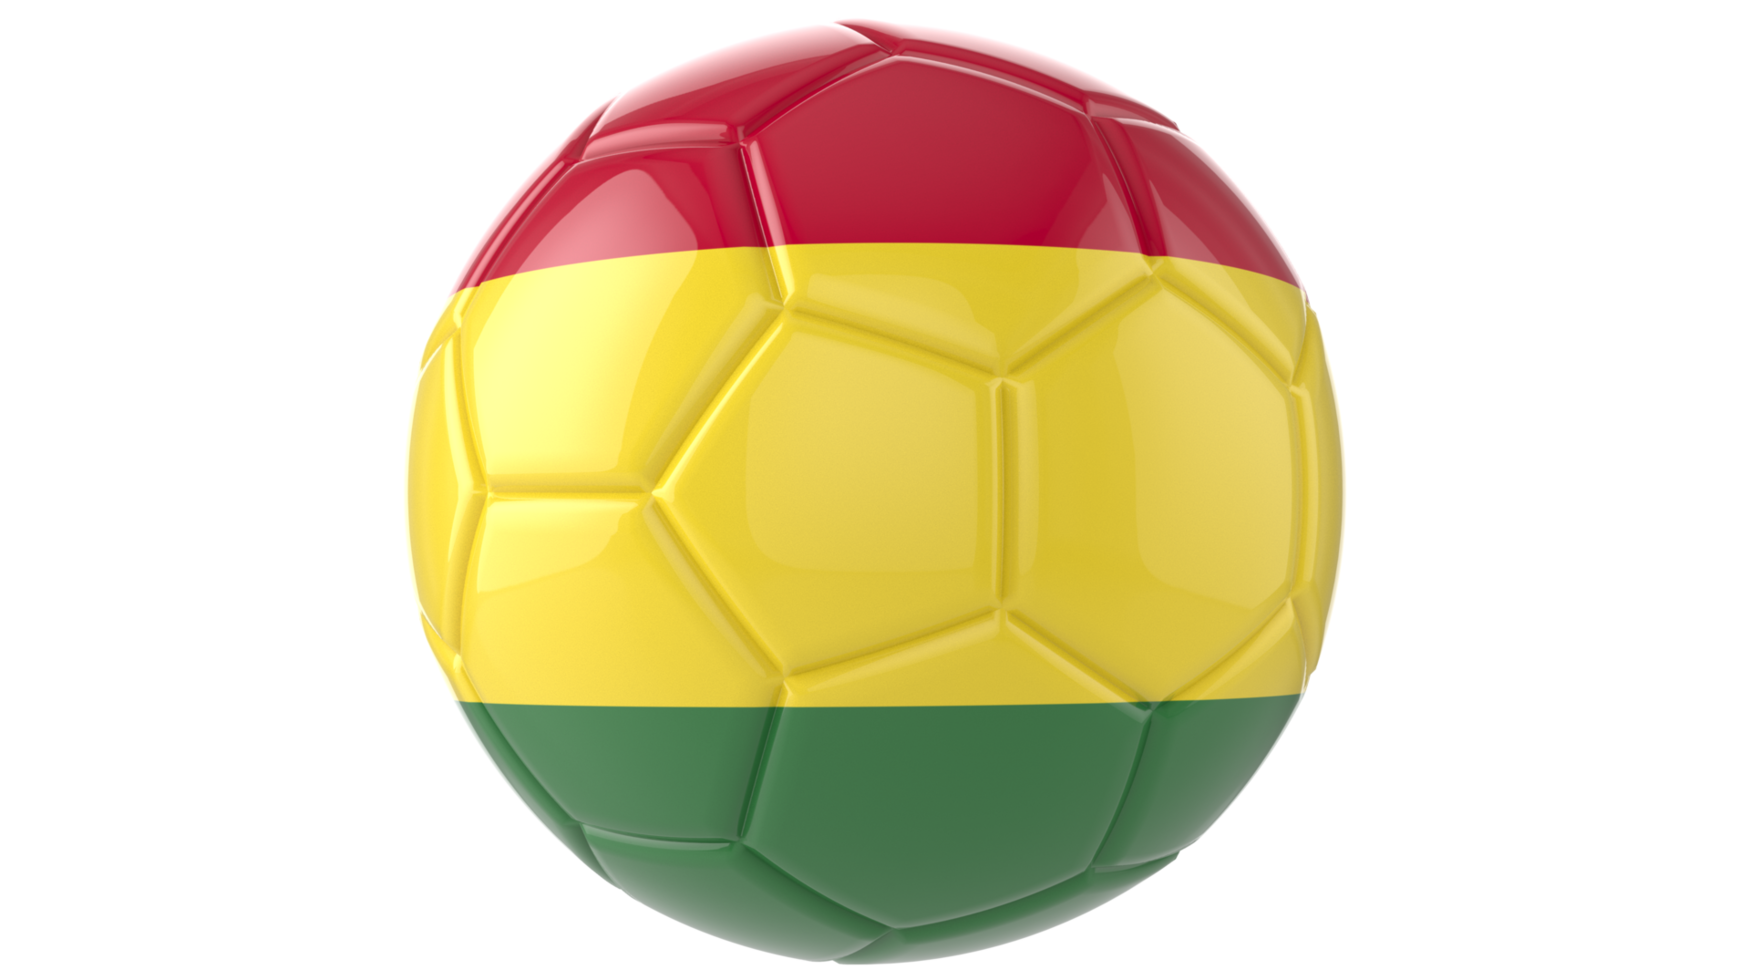 3d realistic soccer ball with the flag of Bolivia on it isolated on transparent PNG background